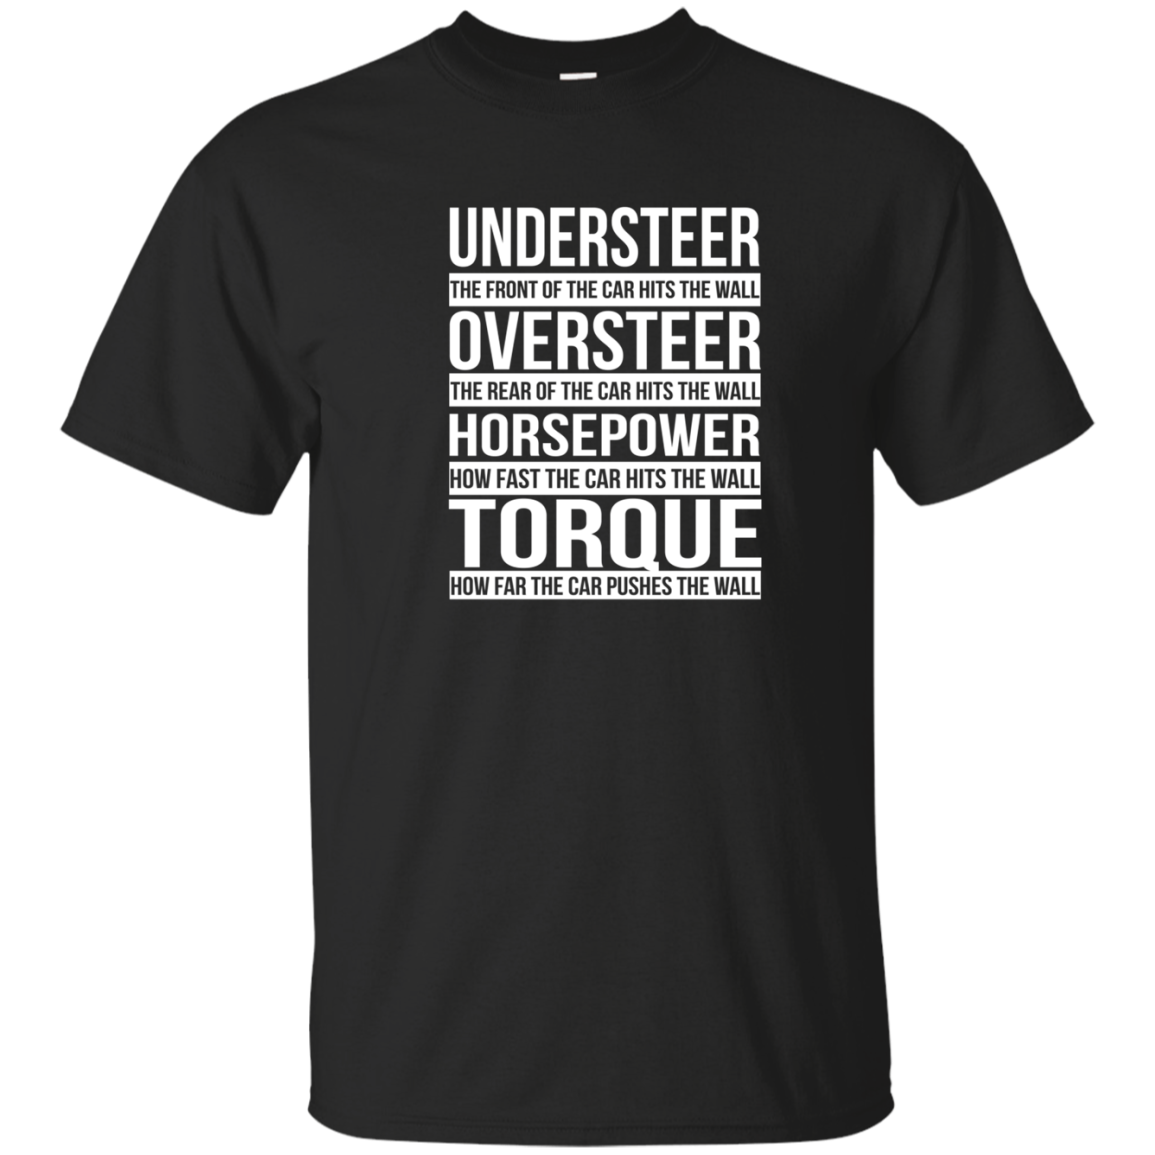 Understeer: The Front Of The Car Hits The Wall shirt, tank, racerback